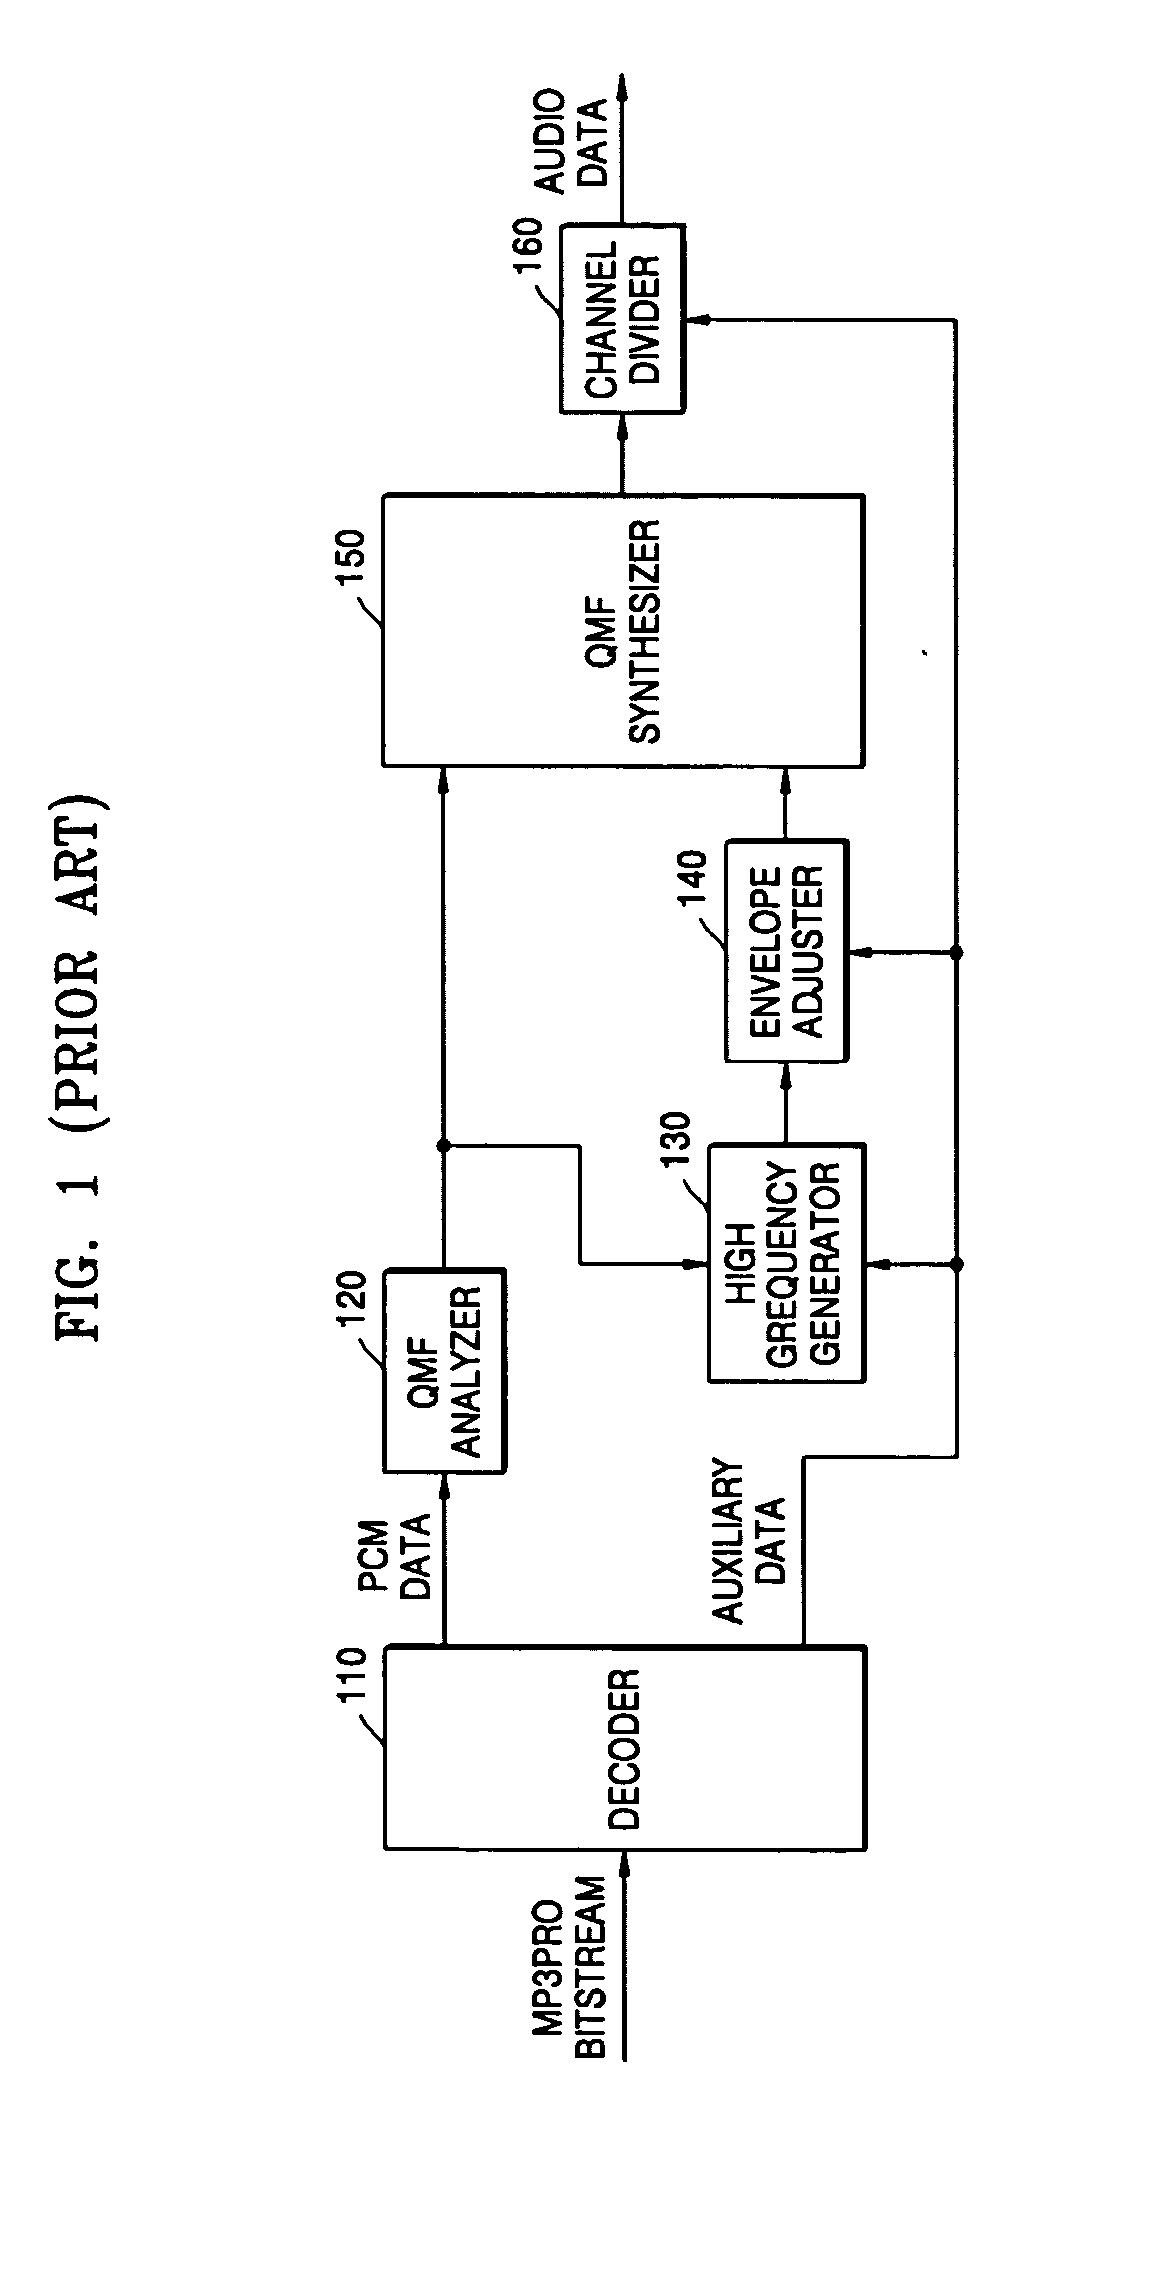 Method and apparatus to recover a high frequency component of audio data